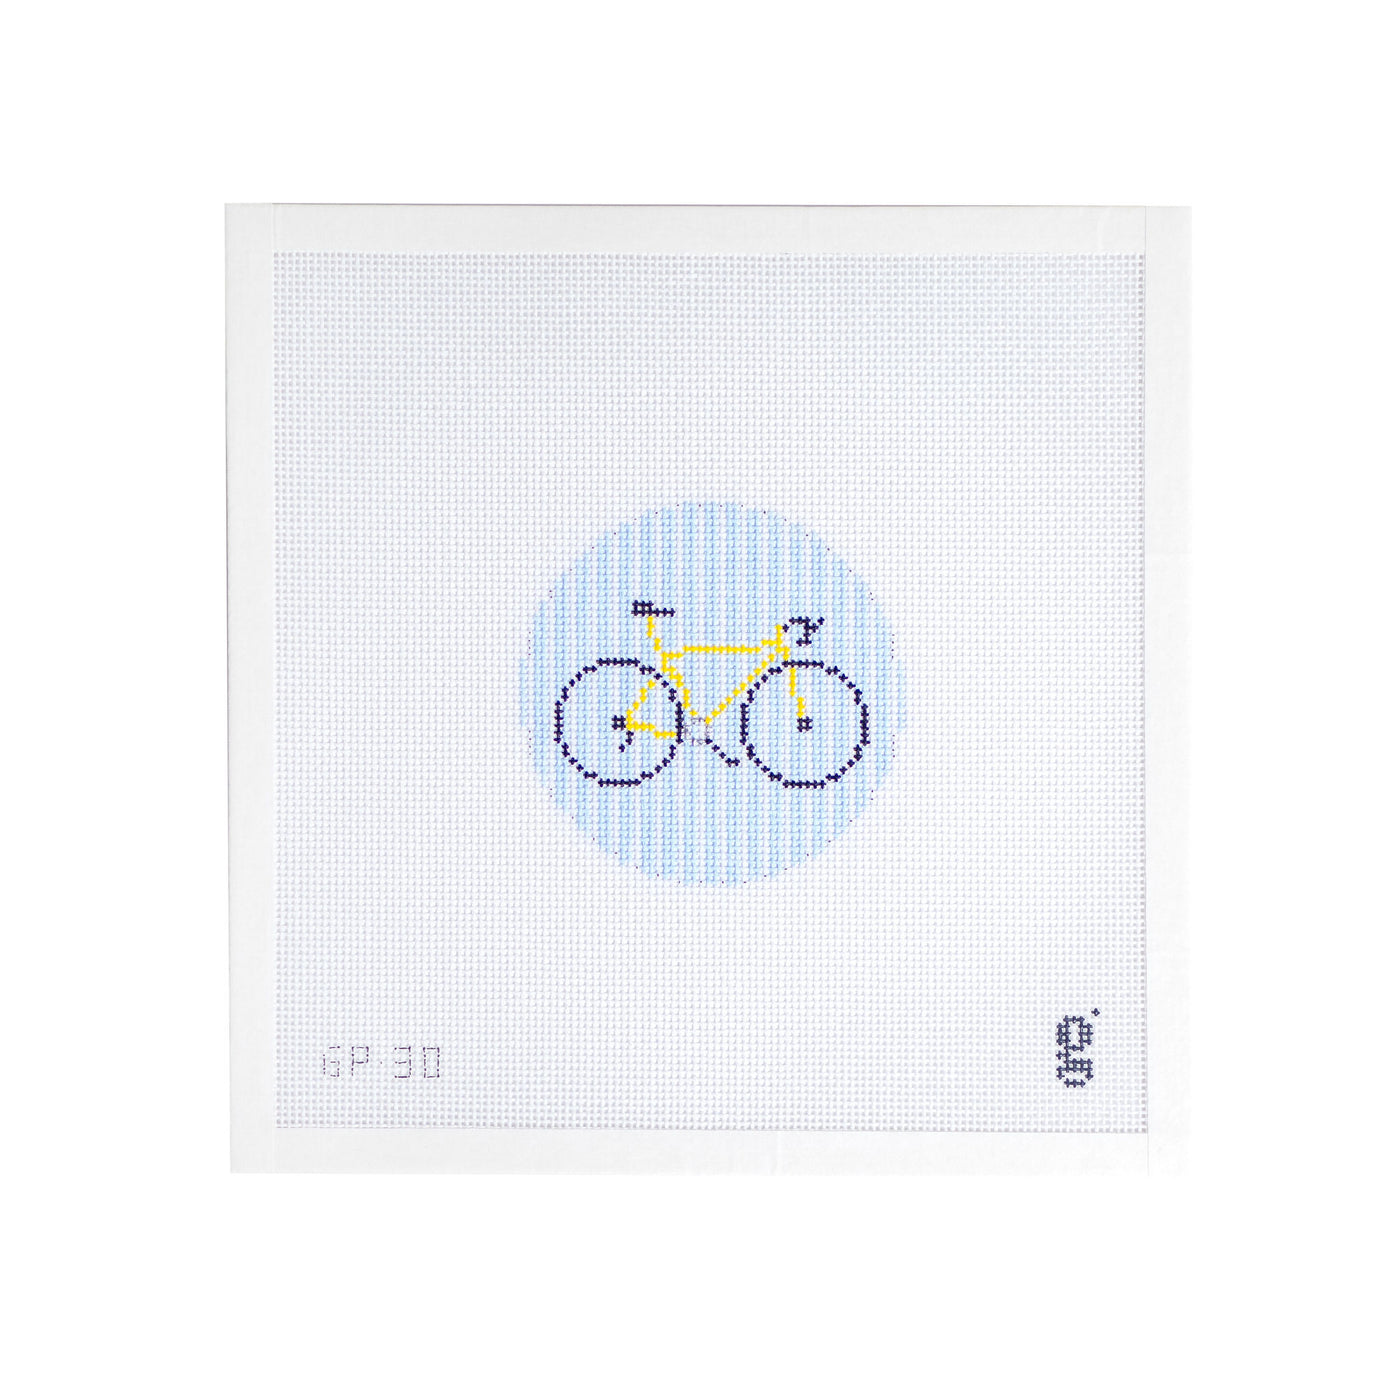 White square shaped needlepoint canvas with blue and white striped circle at center with a yellow road bike. The goodpoint logo is at bottom right corner and the SKU is at bottom left corner.